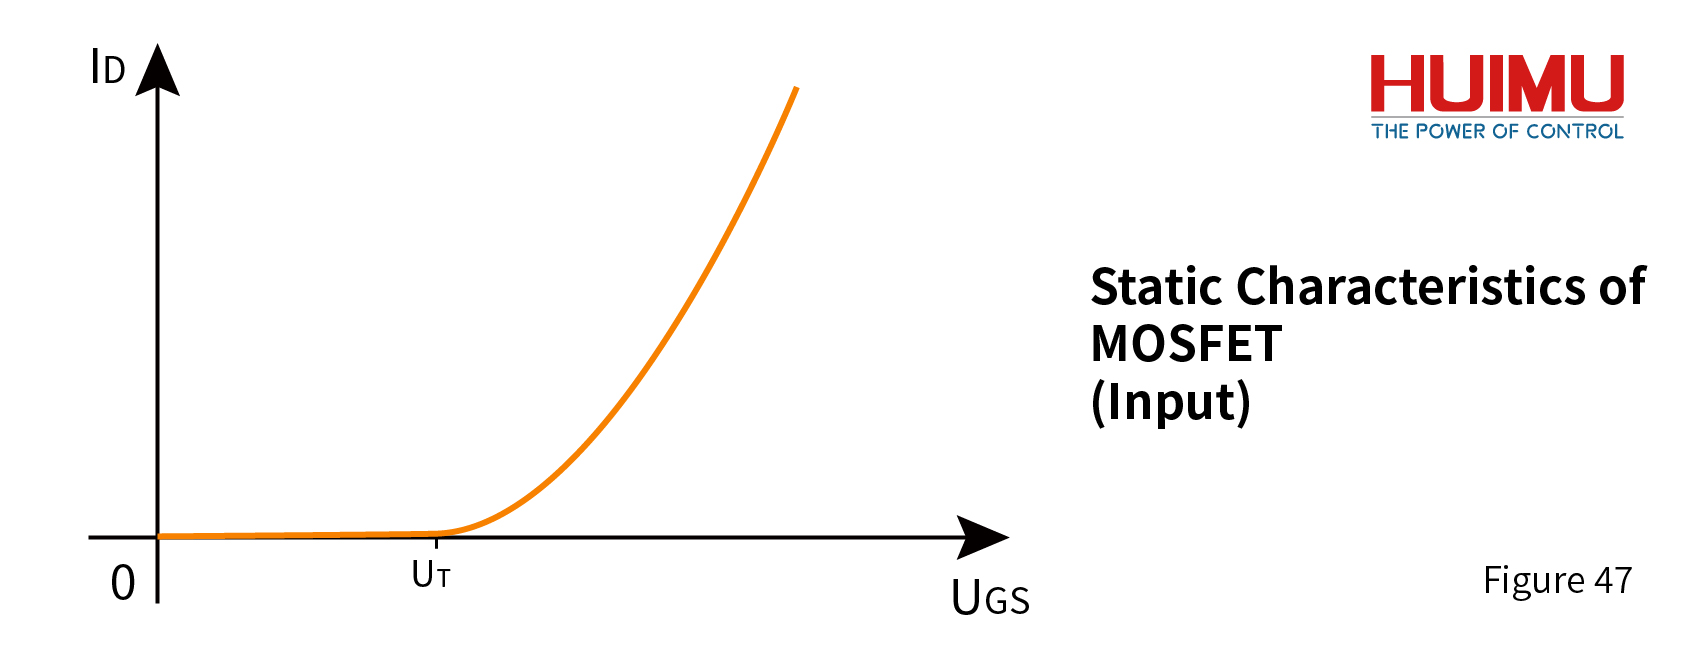 The Input of MOSFET